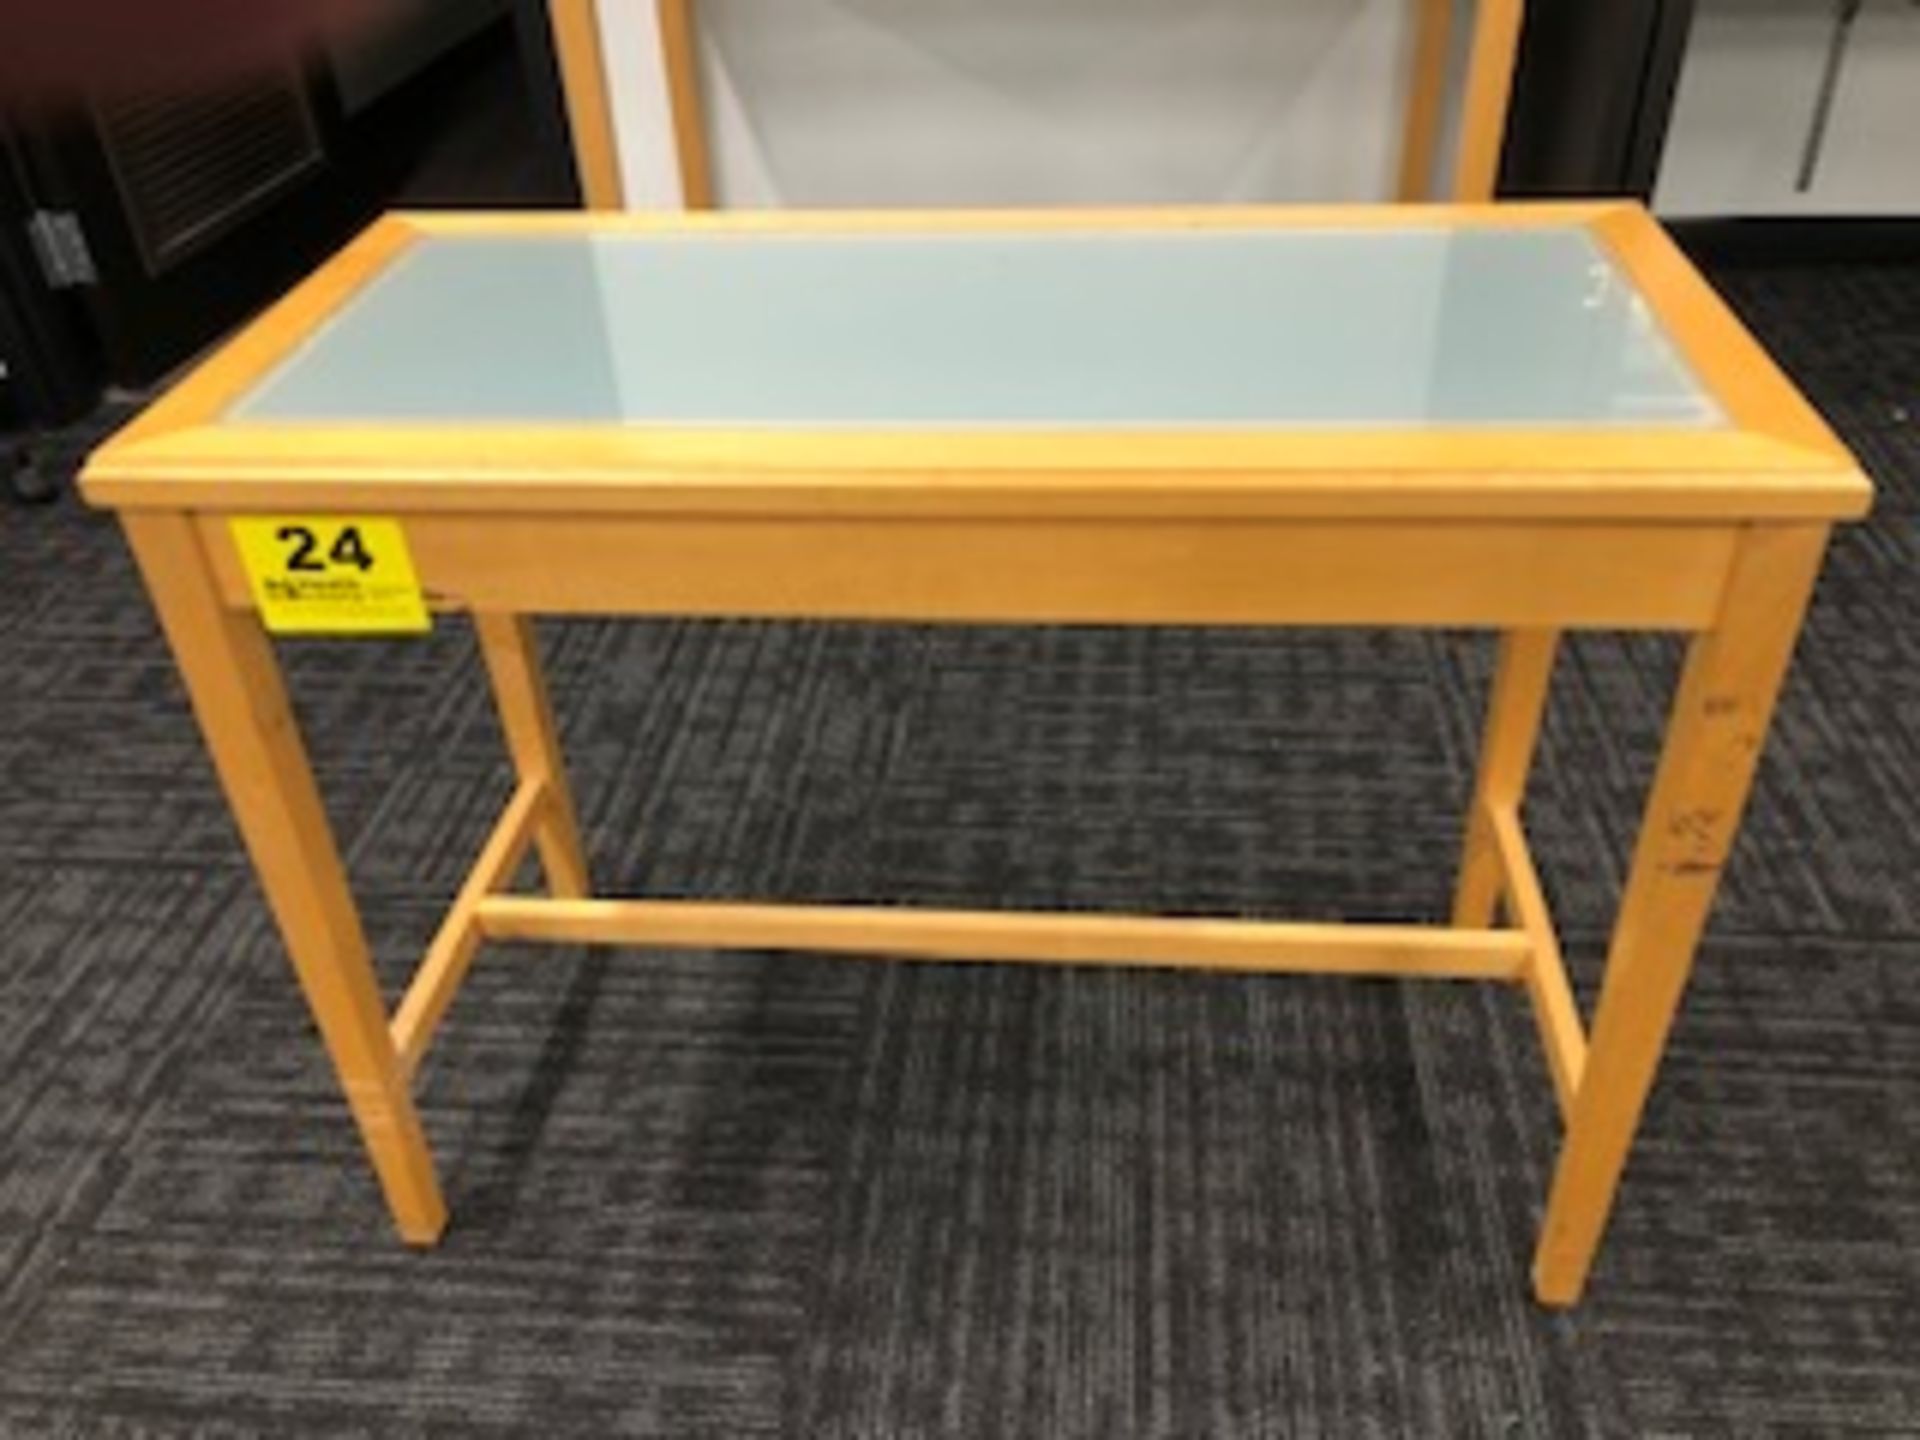 TABLE 37.5" X 17.5"